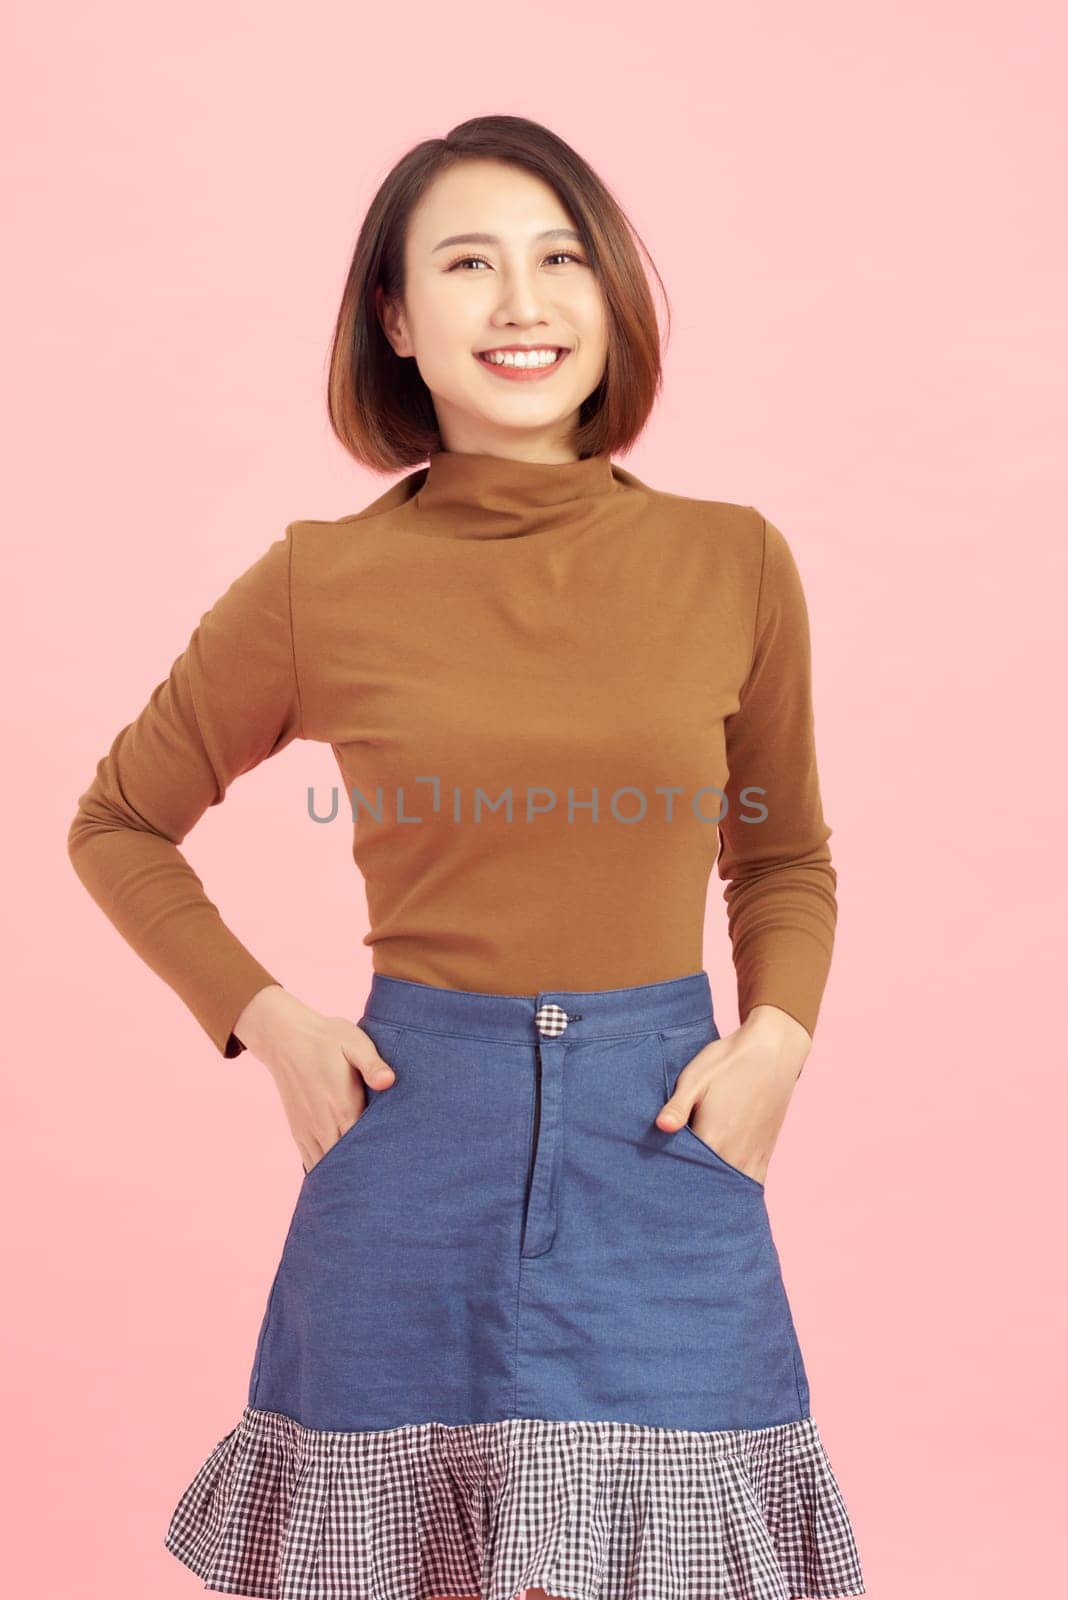 Attractive young Asian woman smiling isolated over pink background.